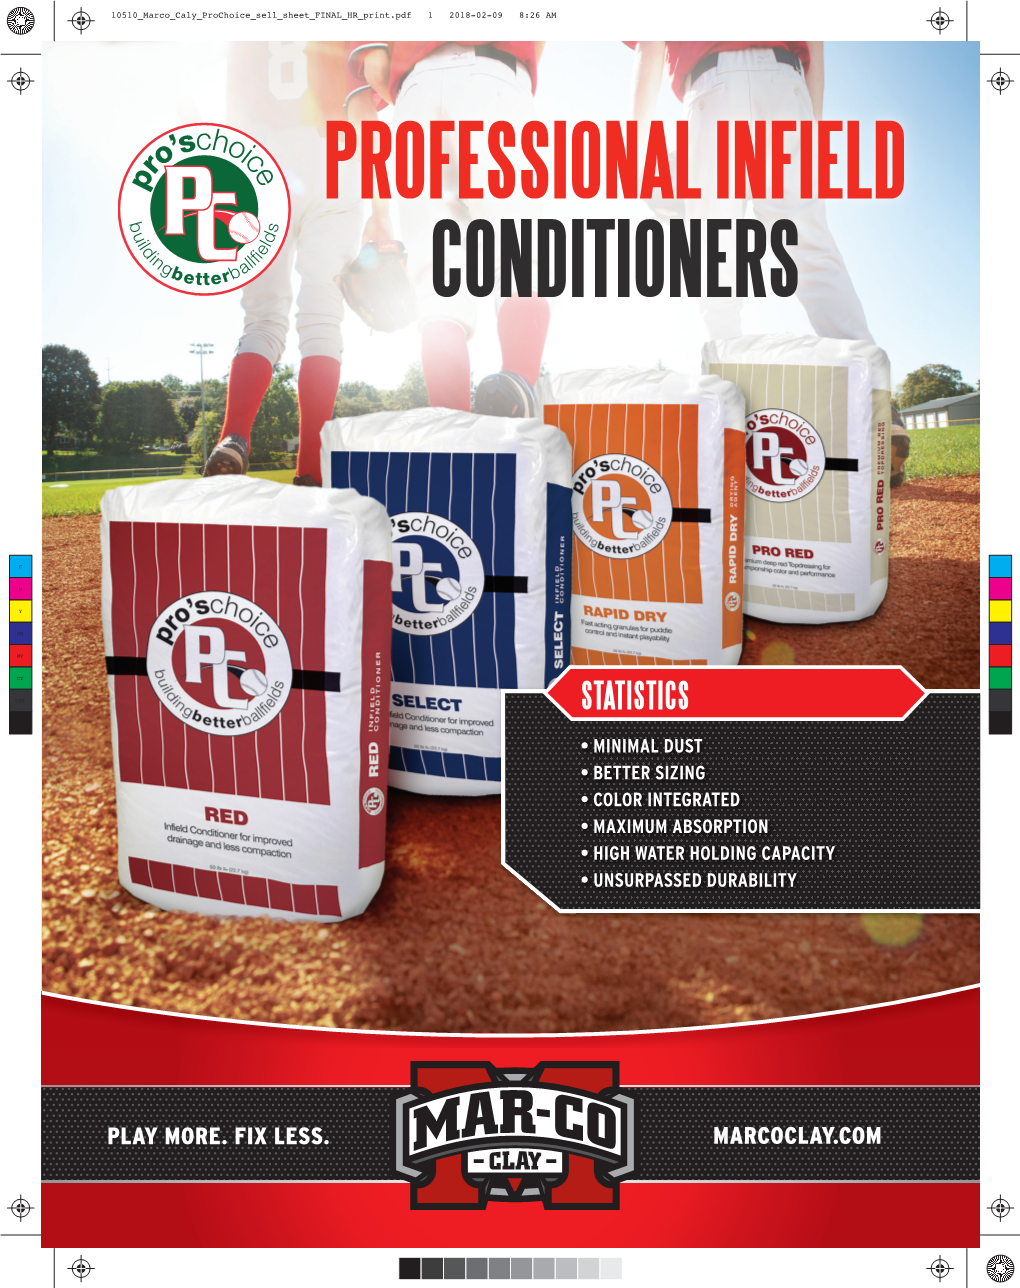 Professional Infield Conditioners